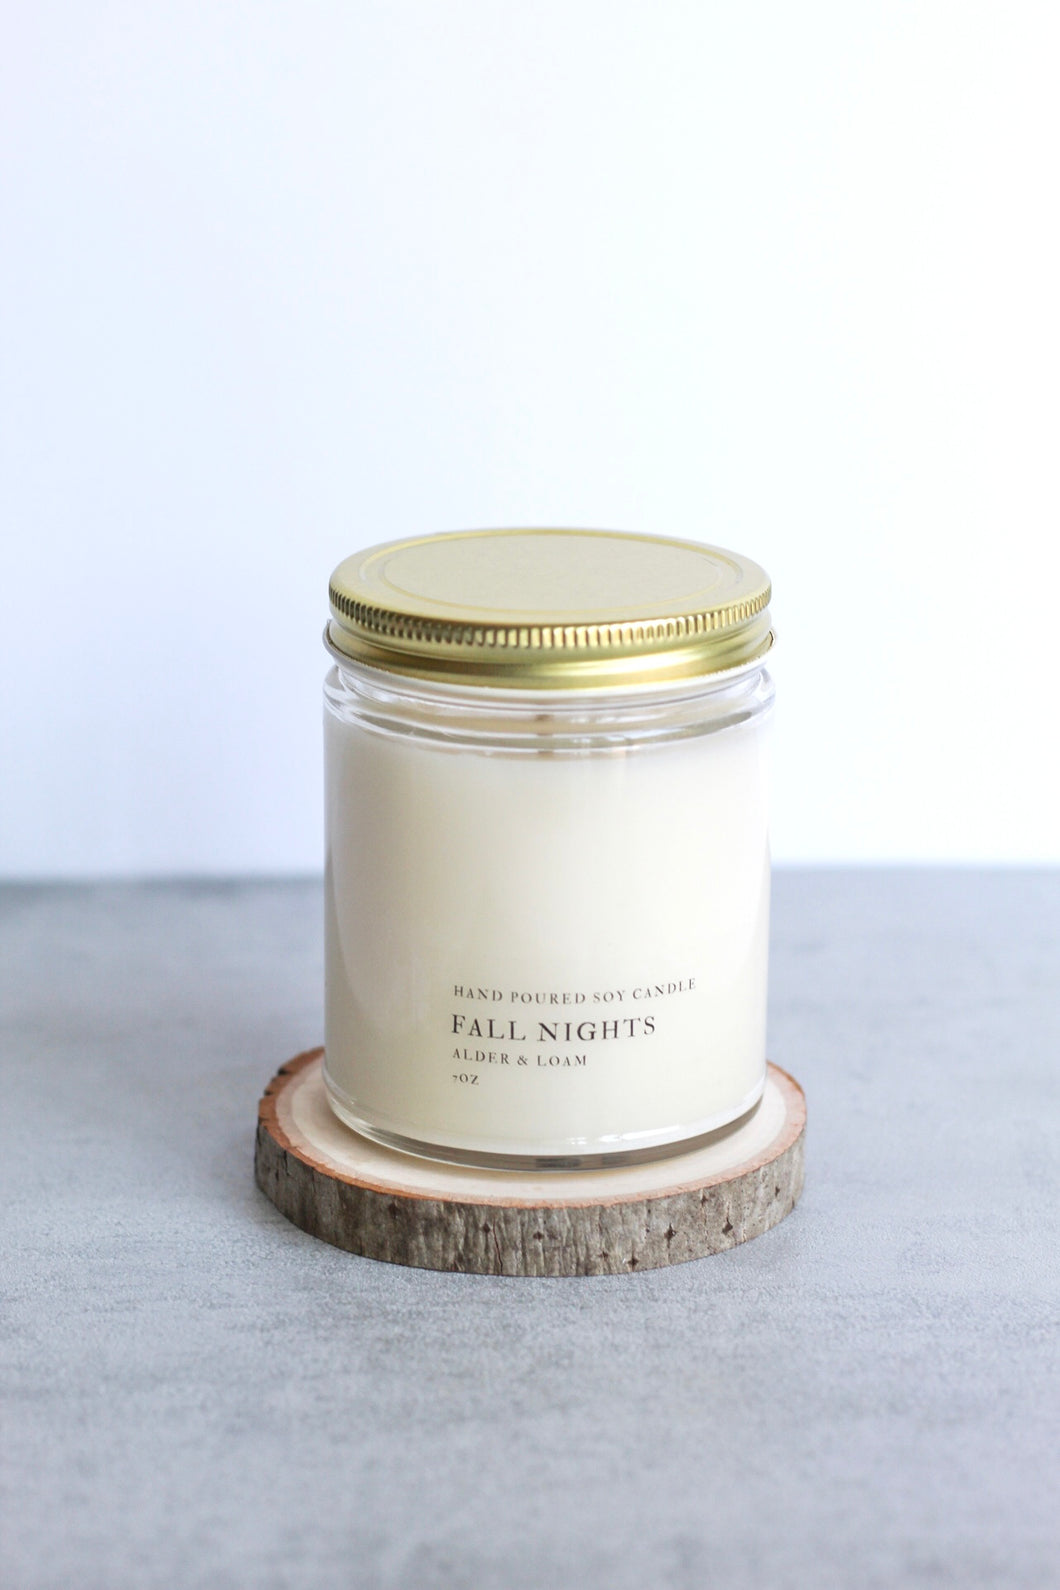 Fall Nights Soy Candle, Hand Poured, Natural, Eco Friendly, Earthy Scent, Fall Candle, 7 oz Jar